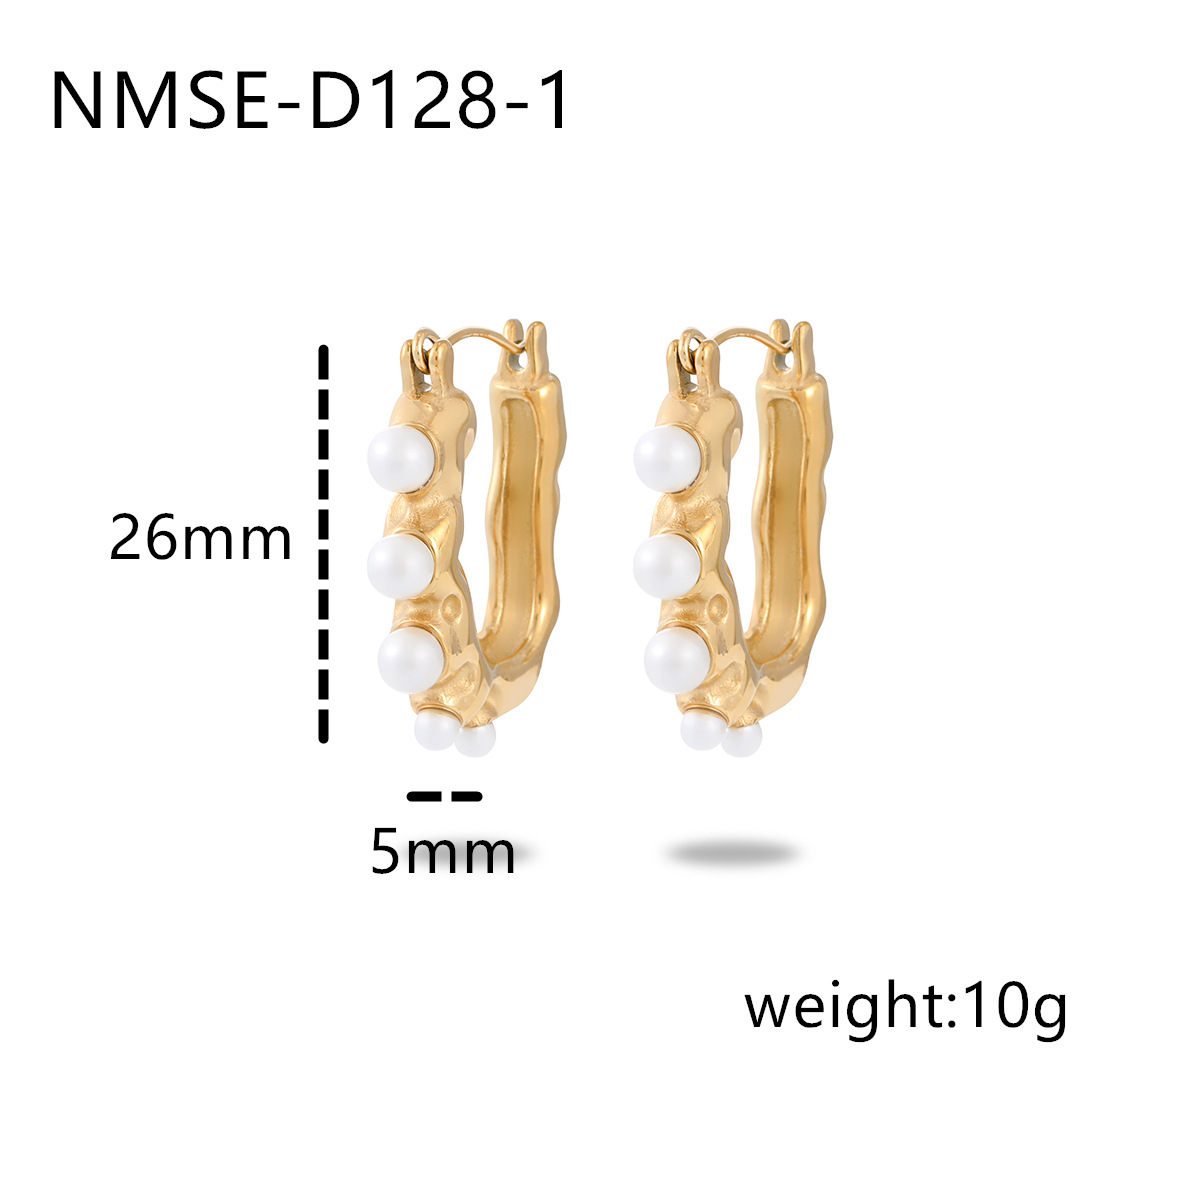 NMSE-D128-1